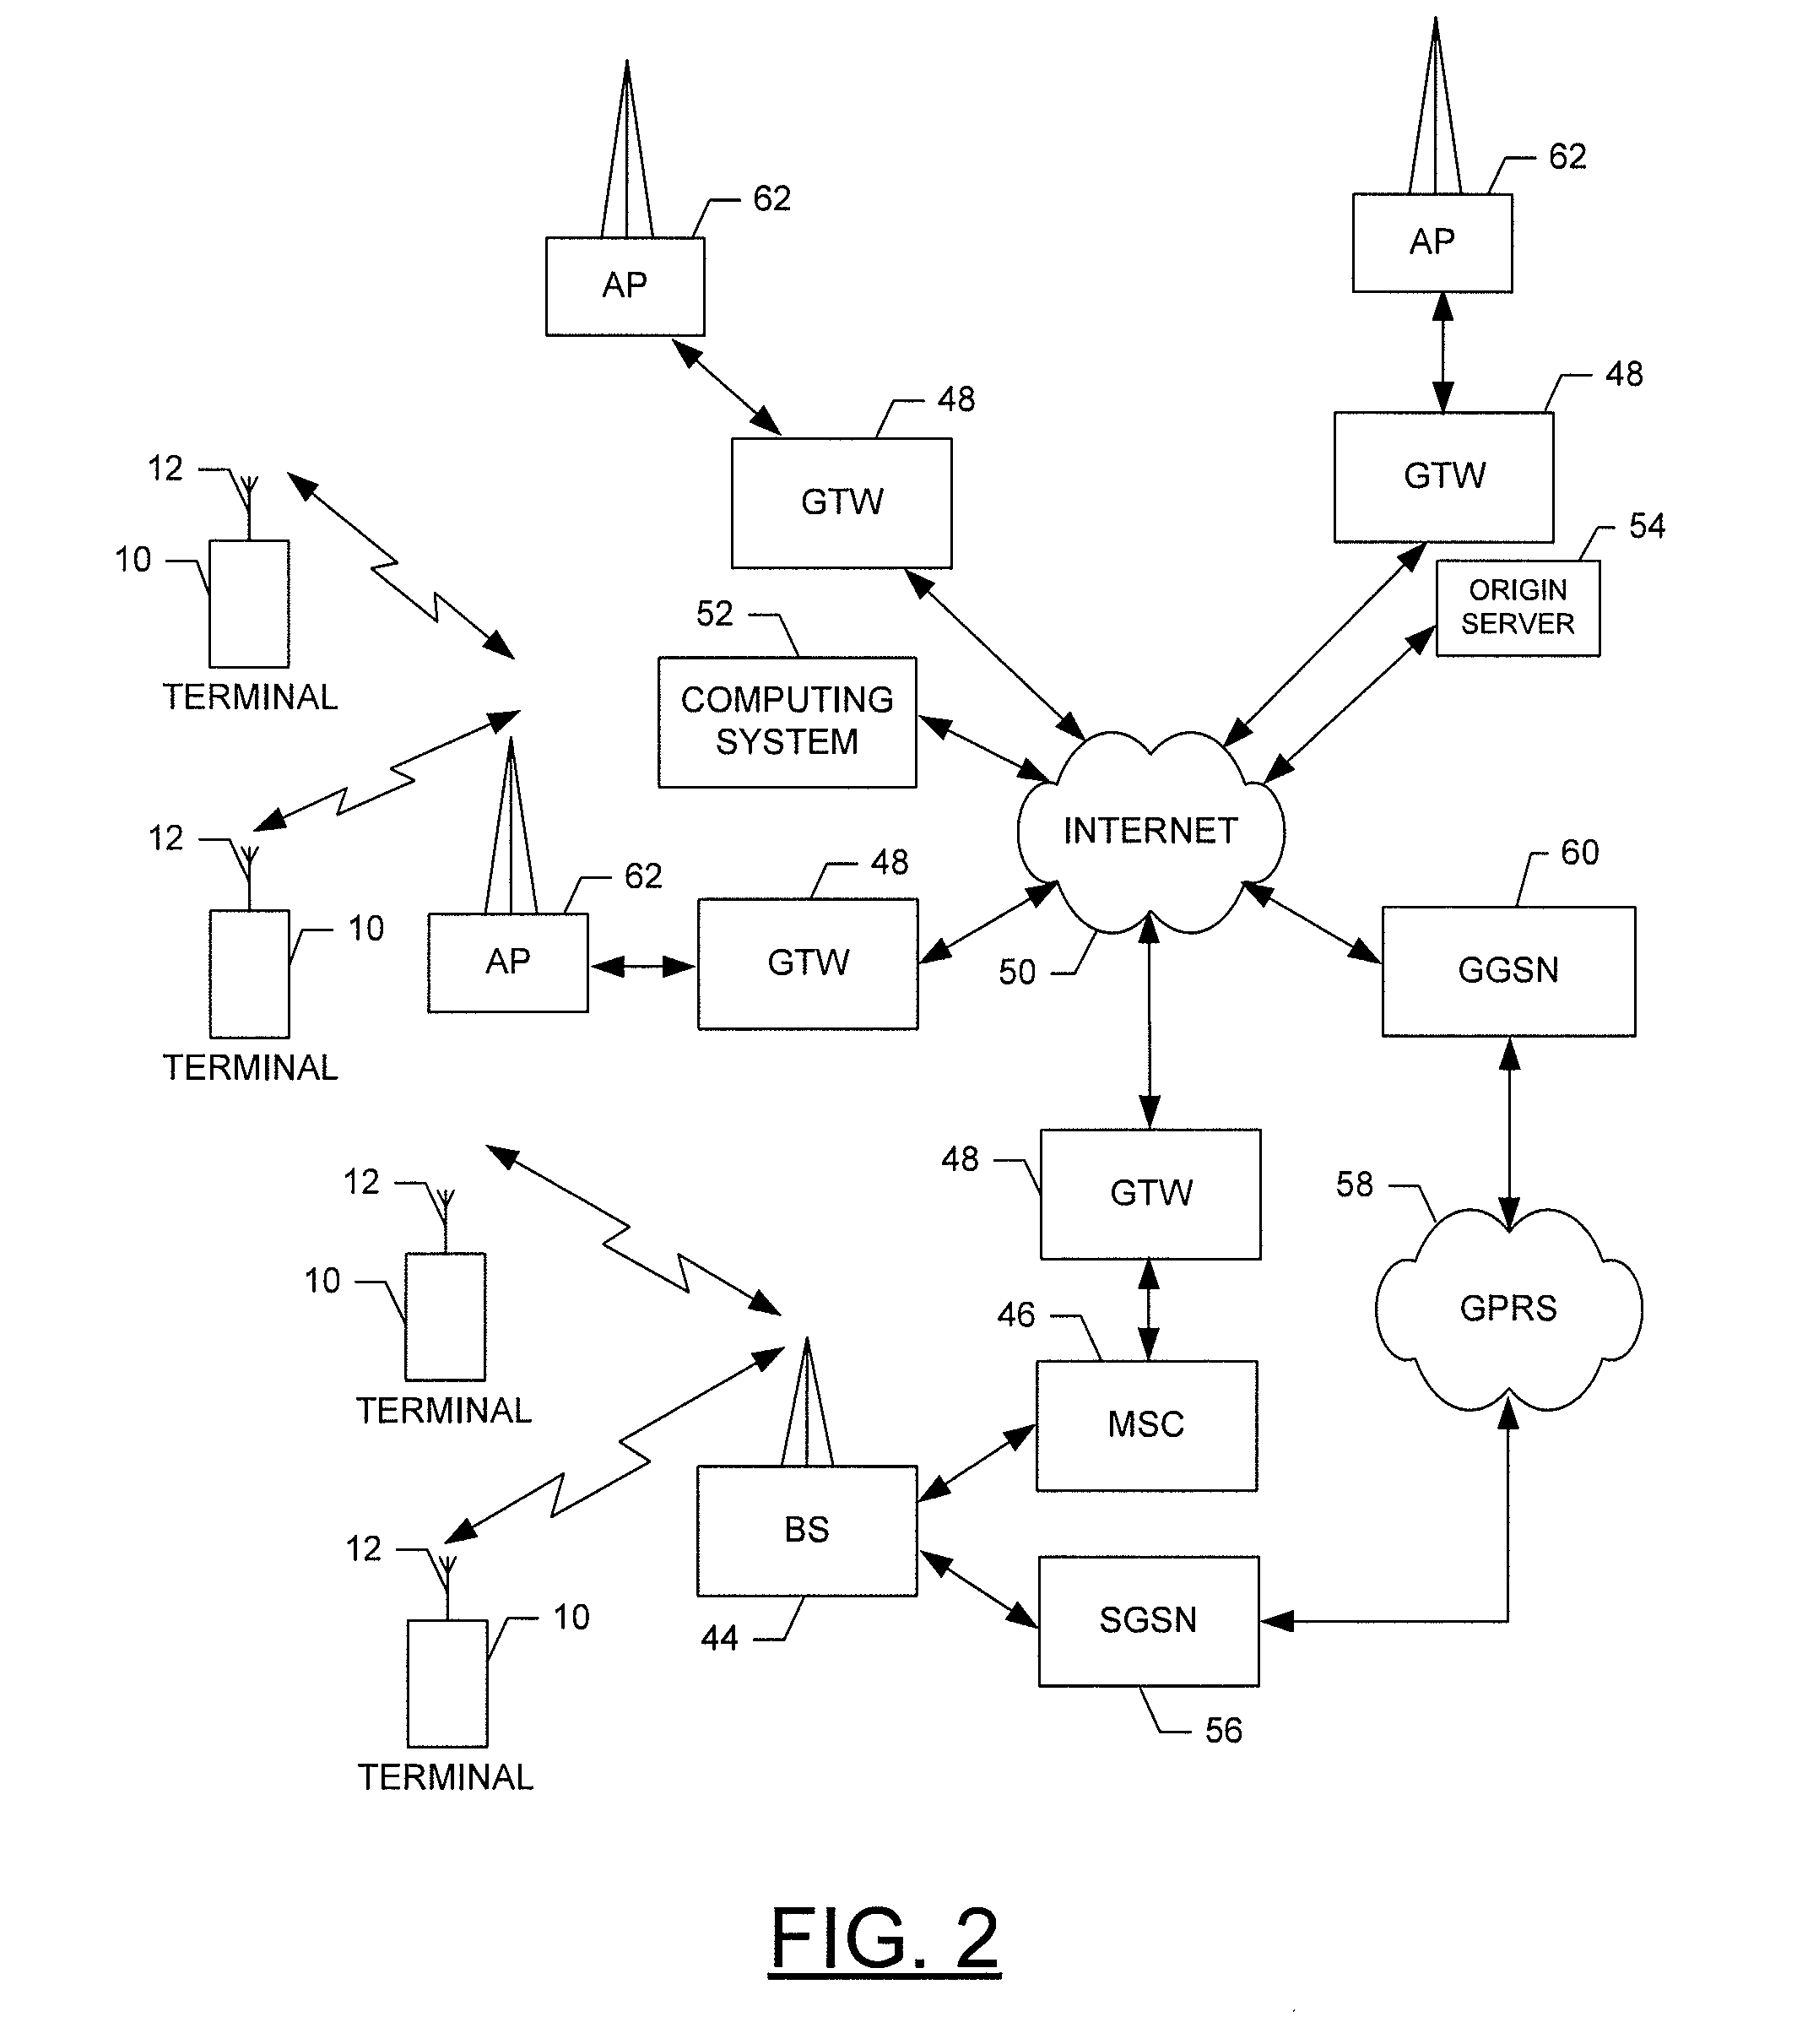 Method, Apparatus and Computer Program Product for Intelligent Workload Control of Distributed Storage